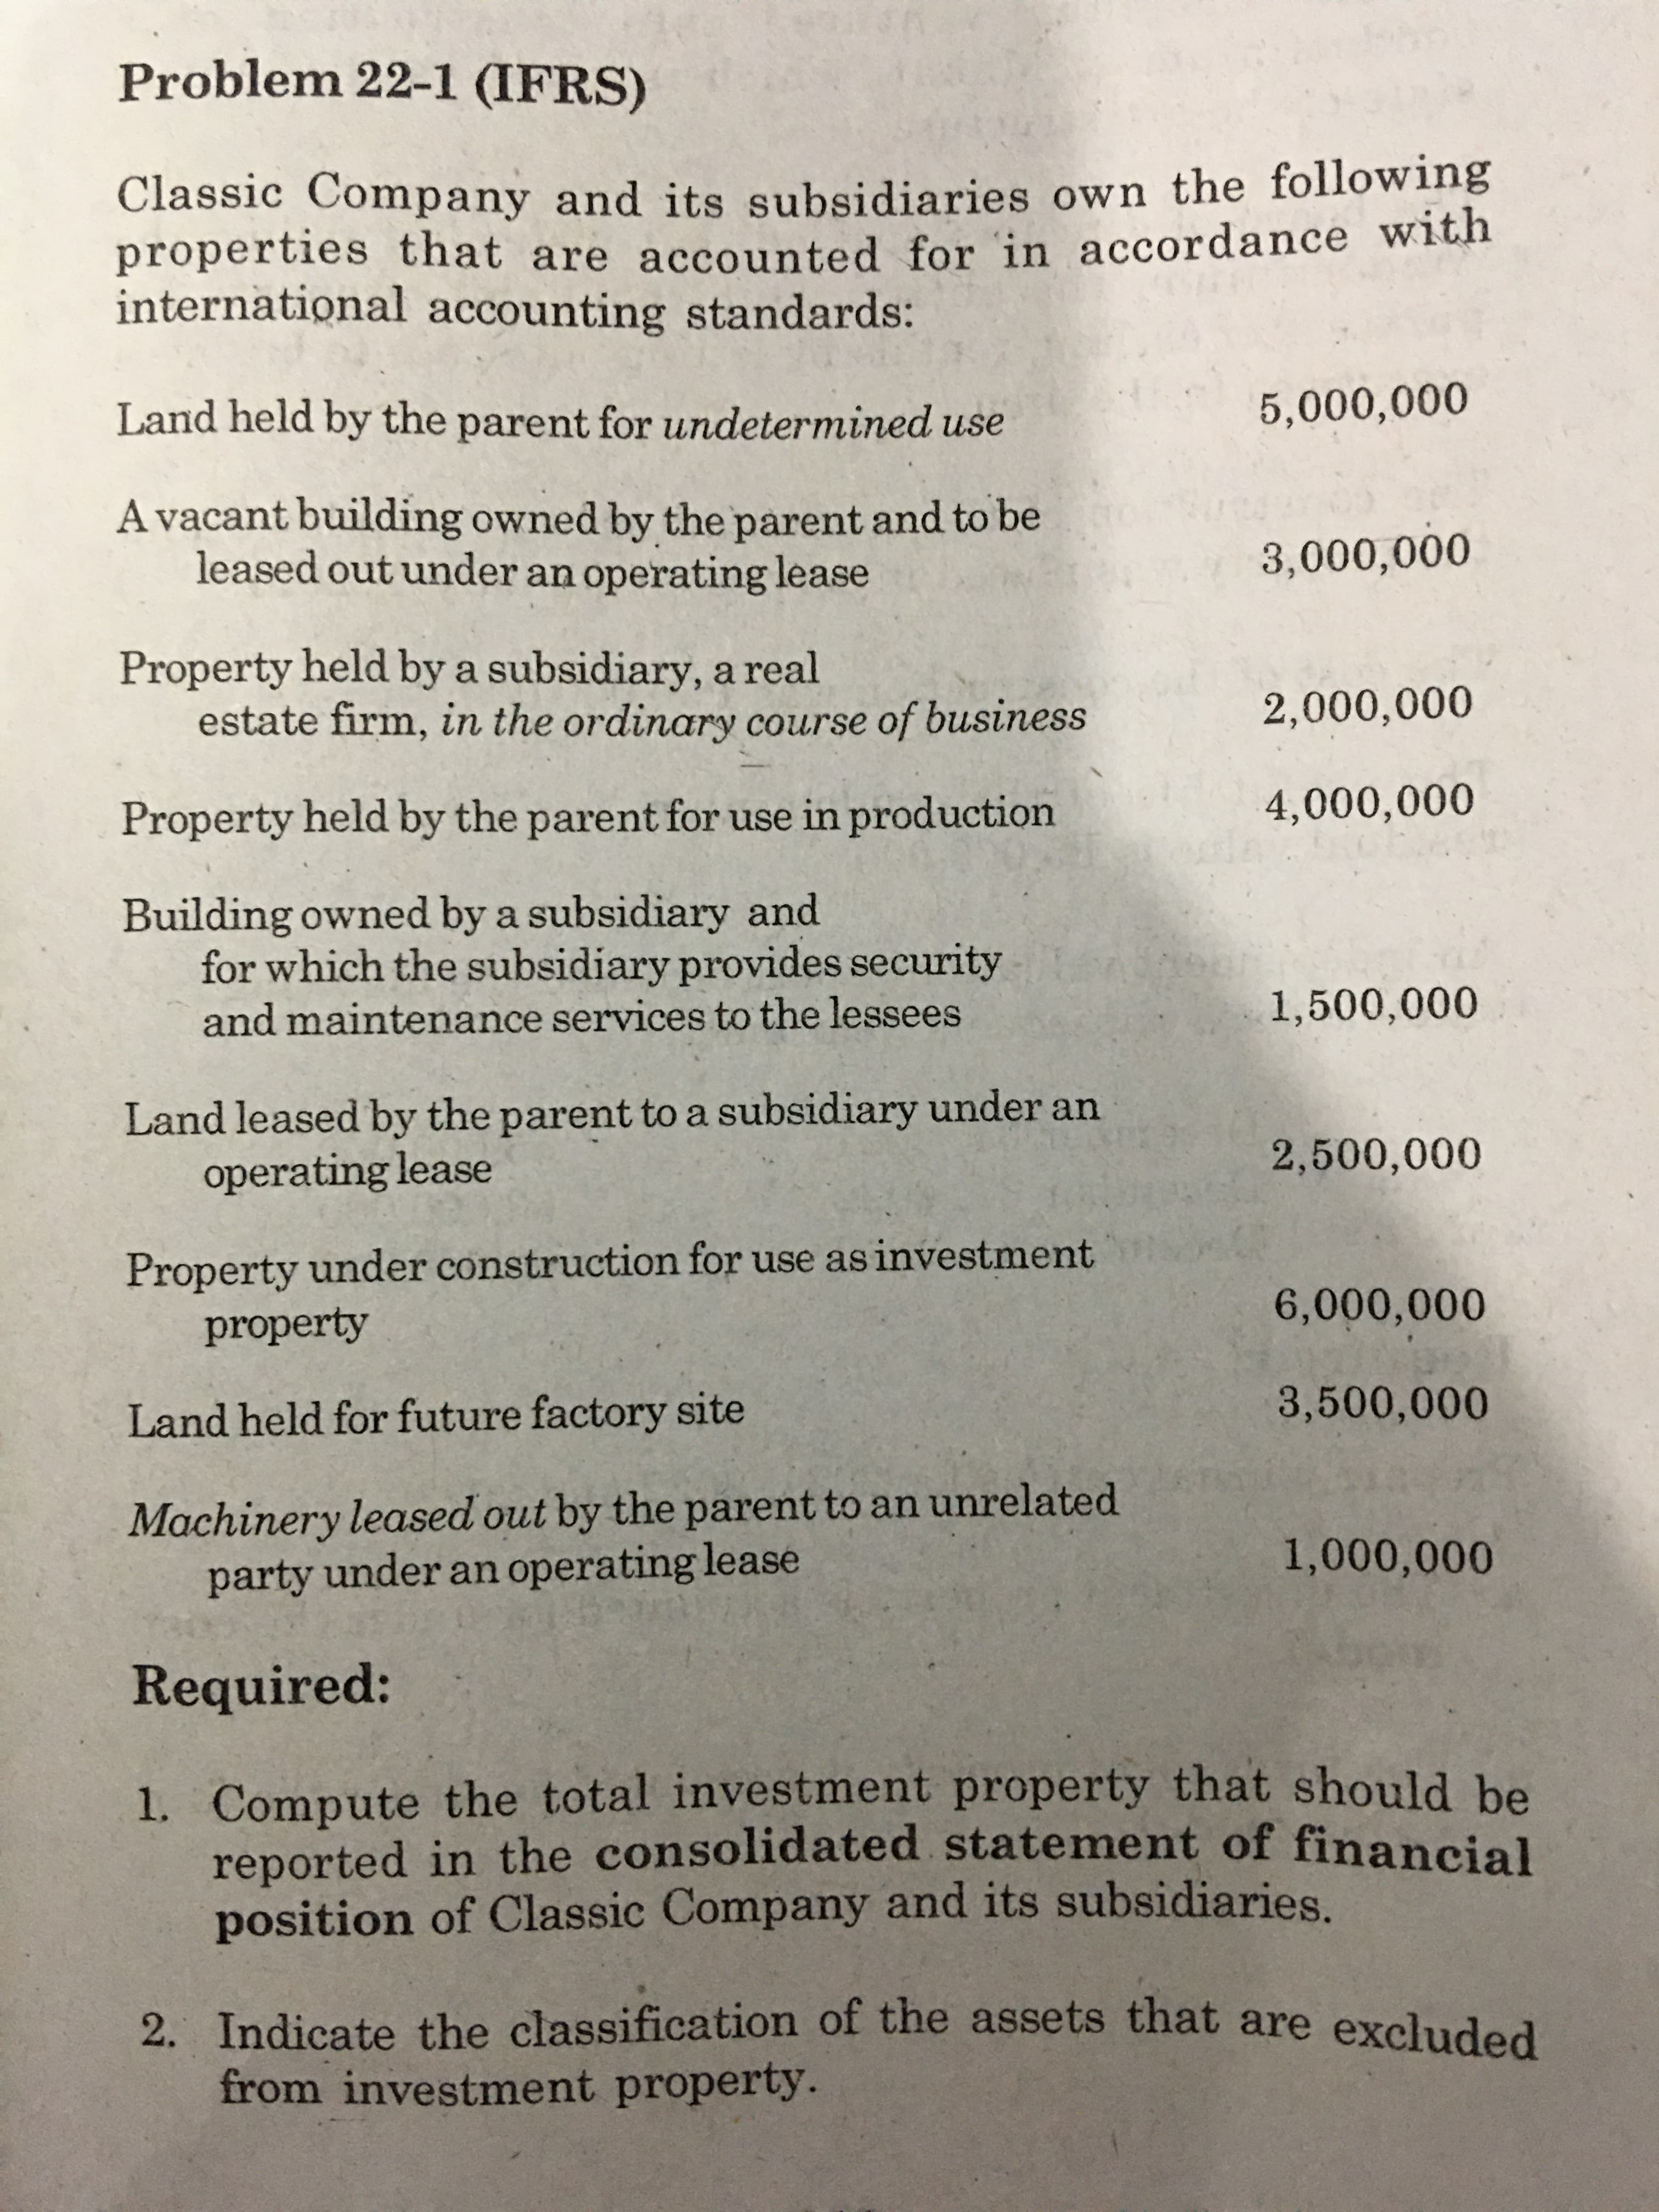 Problem 22-1 (IFRS)
Classic Company and its subsidiaries own the following
properties that are accounted for in accordance with
international accounting standards:
Land held by the parent for undetermined use
5,000,000
A vacant building owned by the parent and to be
leased out under an operating lease
Property held by a subsidiary, a real
estate firm, in the ordinary course of business
Property held by the parent for use in production
Building owned by a subsidiary and
for which the subsidiary provides security
and maintenance services to the lessees
Land leased by the parent to a subsidiary under an
operating lease
2,500,000
Property under construction for use as investment
property
Land held for future factory site
Machinery leased out by the parent to an unrelated
party under an operating lease
1,000,000
Required:
1. Compute the total investment property that should be
reported in the consolidated statement of financial
position of Classic Company and its subsidiaries.
2. Indicate the classification of the assets that are excluded
from investment property.
